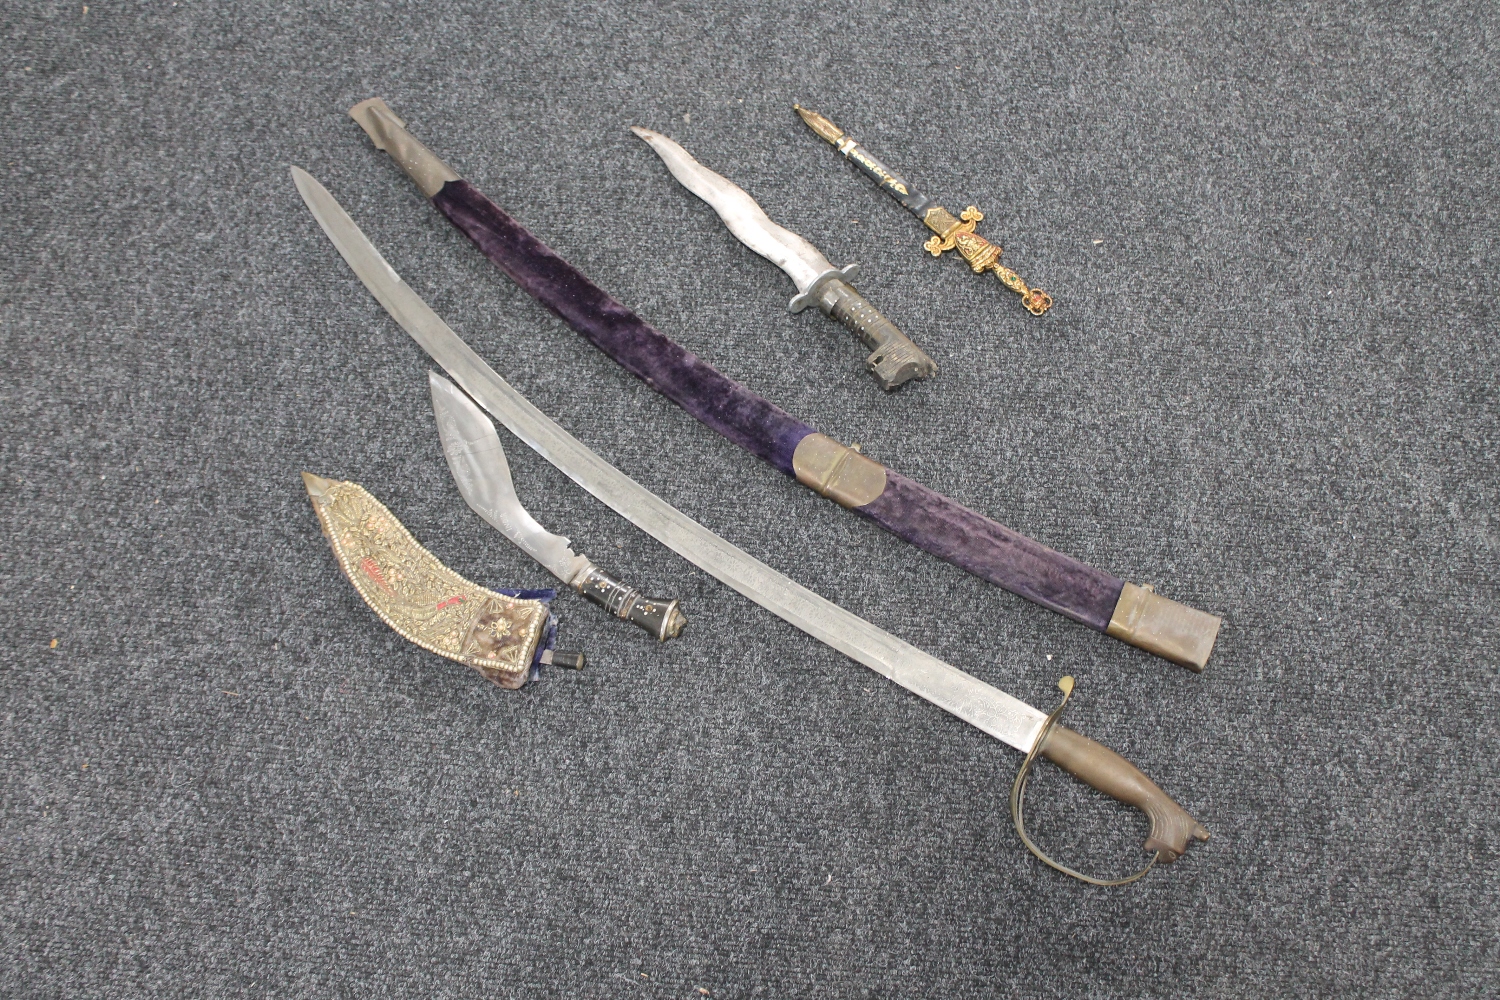 An Indian sword with scabbard and three other Eastern knives